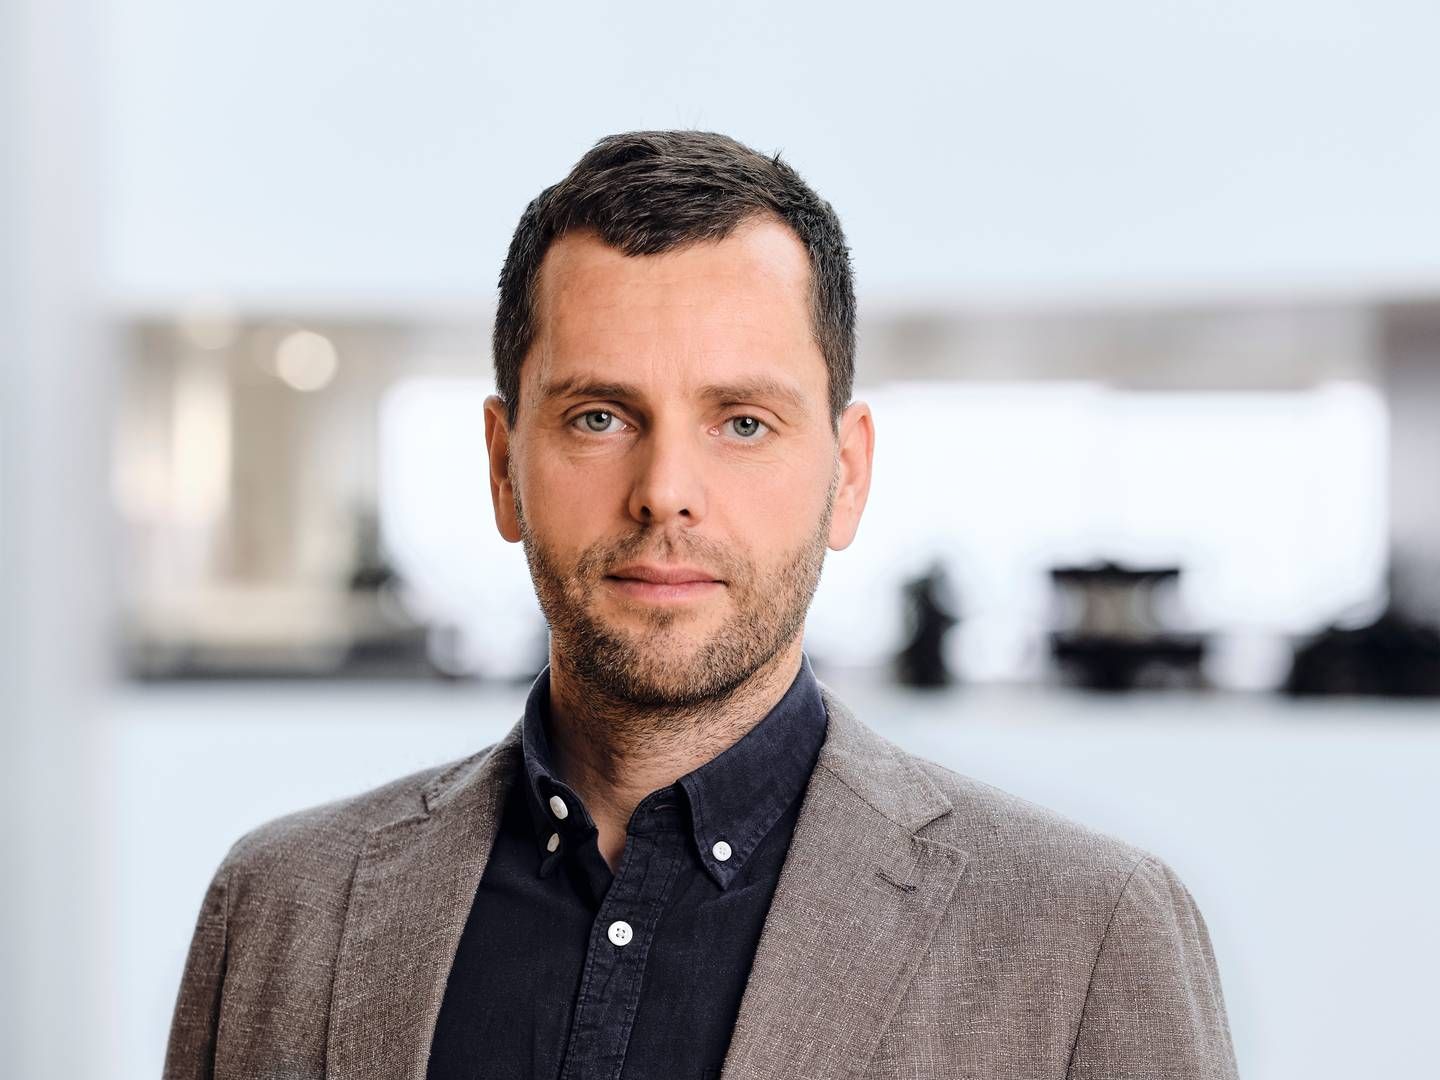 Jacob Ehlerth Jørgensen, Head of ESG at Sampension, says major asset managers "need to stay at the table" to engage with companies on climate risks. | Photo: PR / Sampension